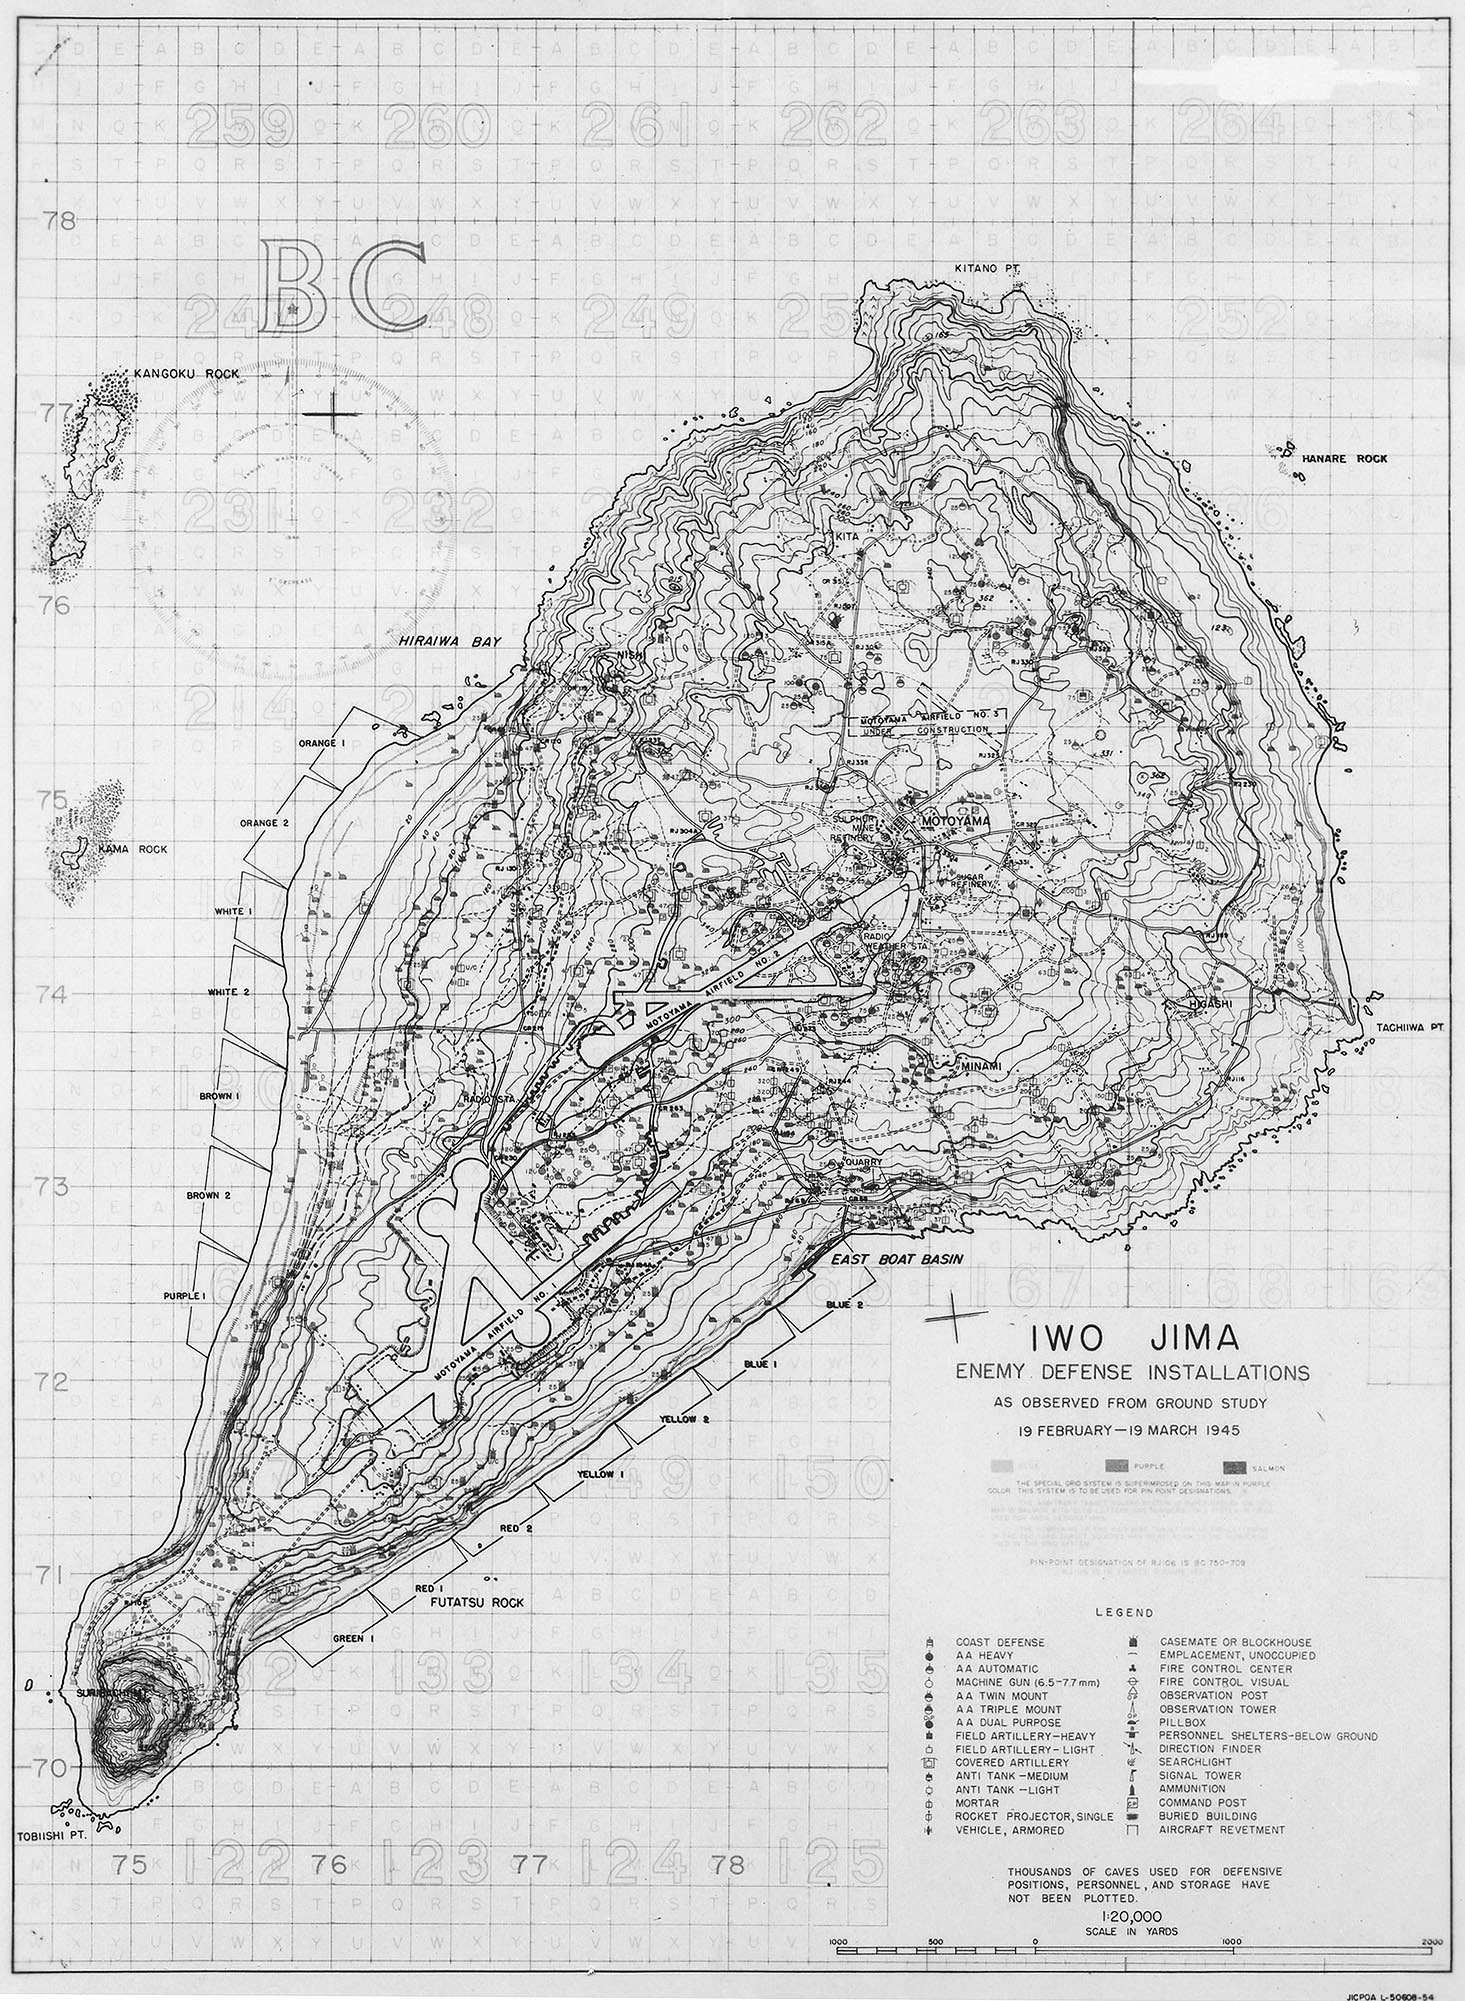 Contour map of Iwo Jima, showing Japanese defense installations as observed from ground study during the period of 19 Feb-19 Mar 1945, map 1 of 2